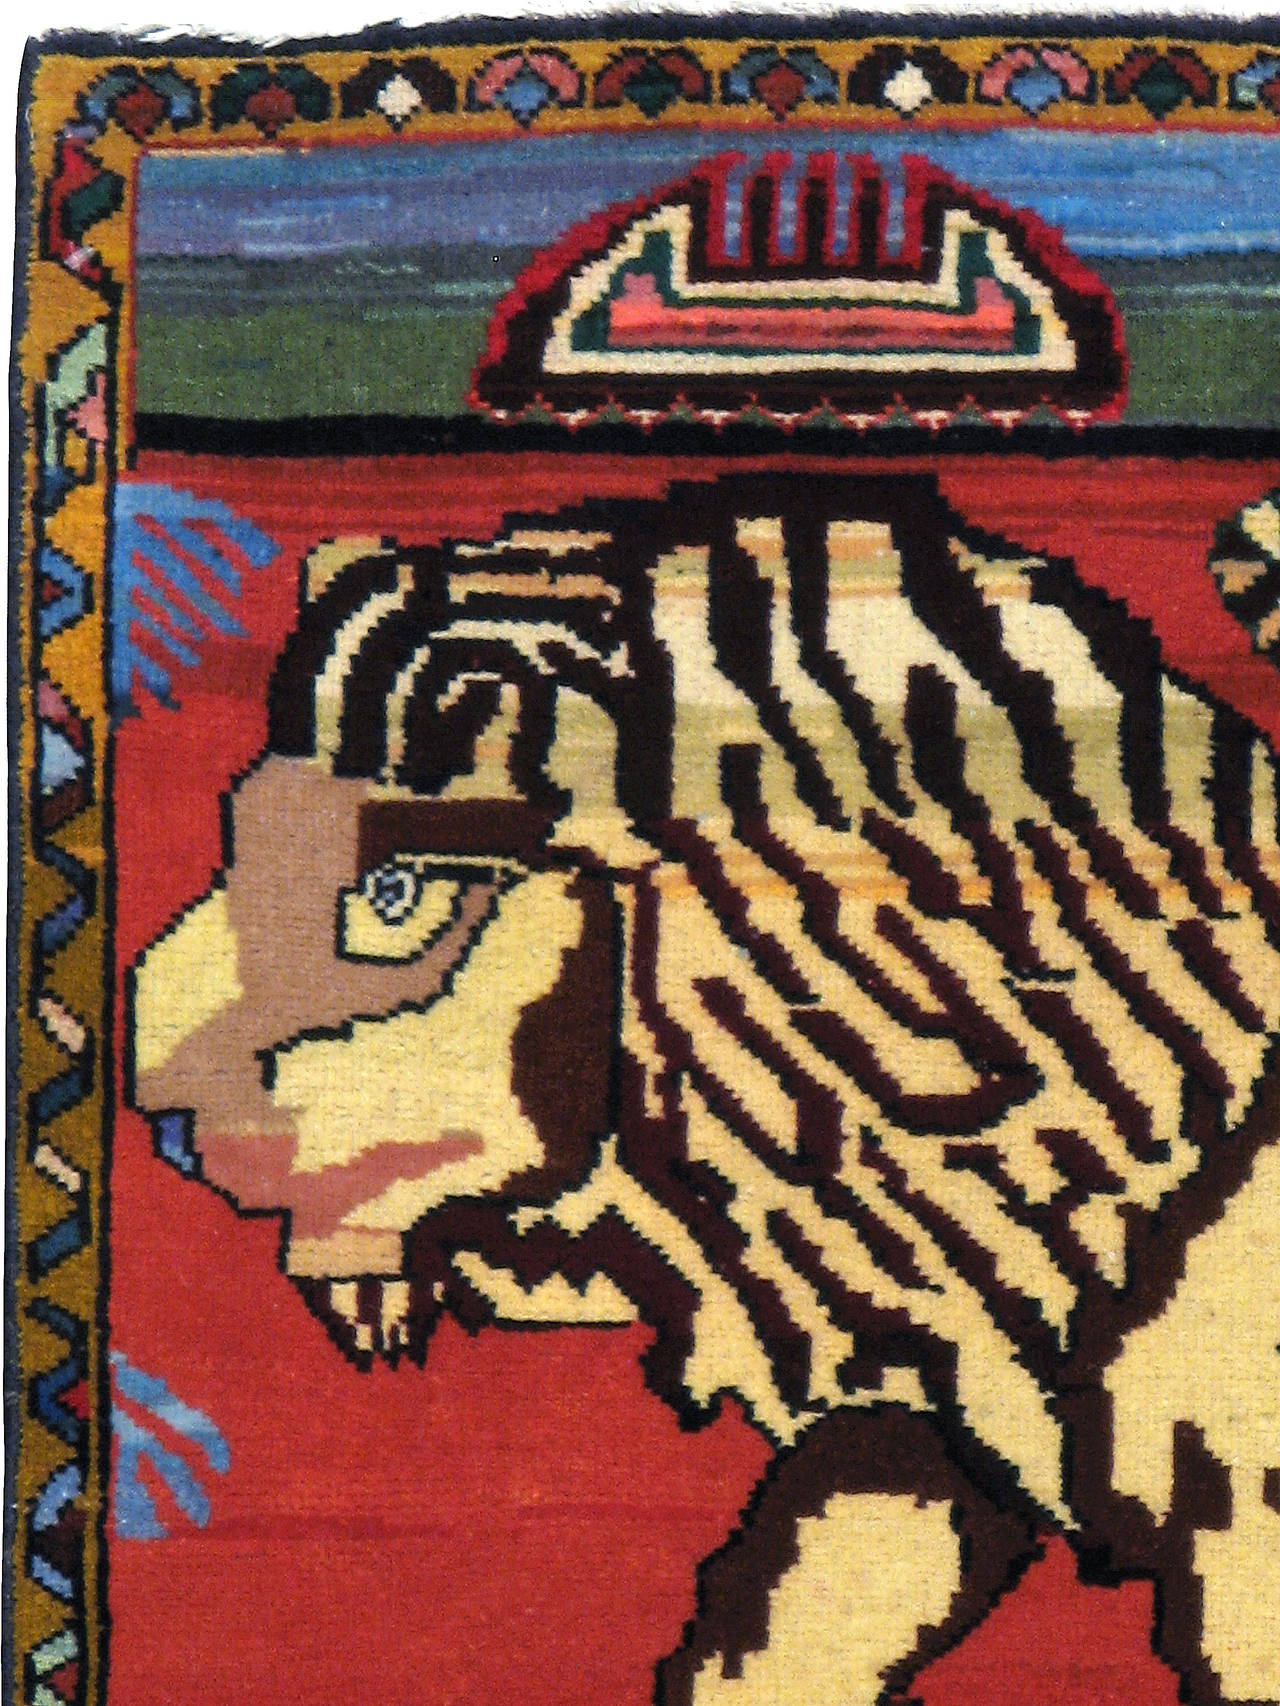 A vintage Persian Tabriz pictorial carpet from the second quarter of the 20th century depicting a male lion.